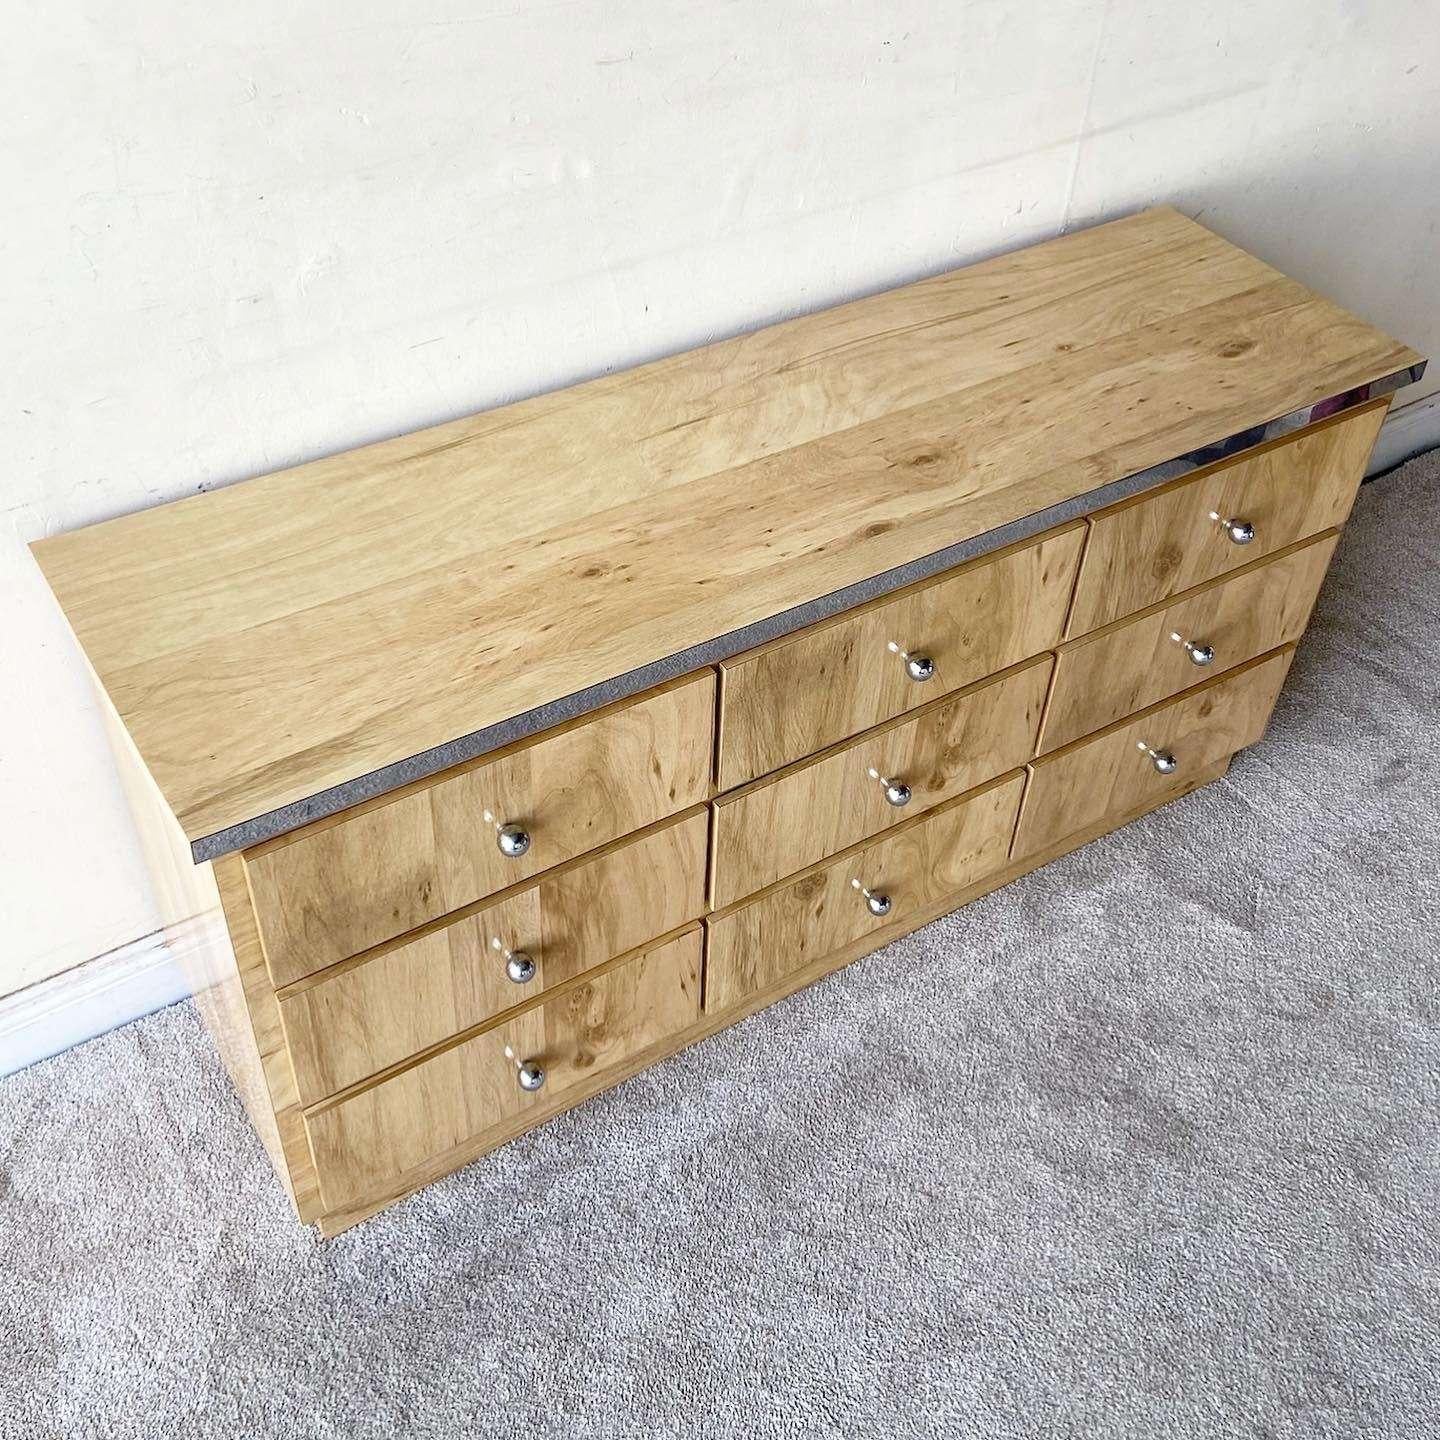 Late 20th Century Postmodern Wood Grain Laminate and Chrome Dresser - 9 Drawers For Sale